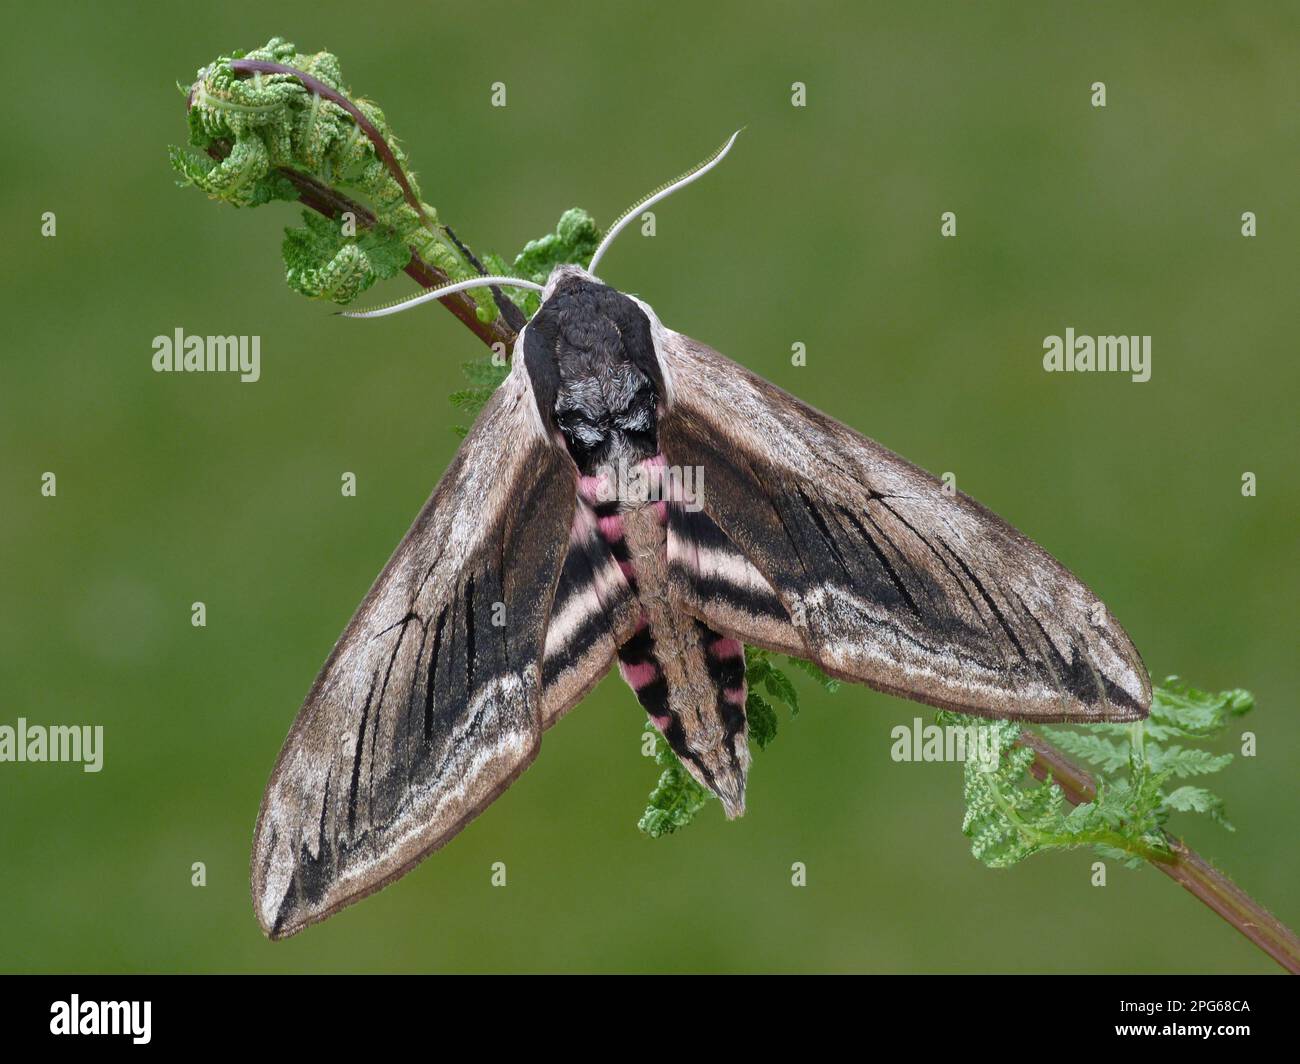 Privet hawkmoth (Sphinx ligustri), Hawkmoth, Insects, Moths, Butterflies, Animals, Other animals, Privet Hawkmoth adult, resting on fern Stock Photo